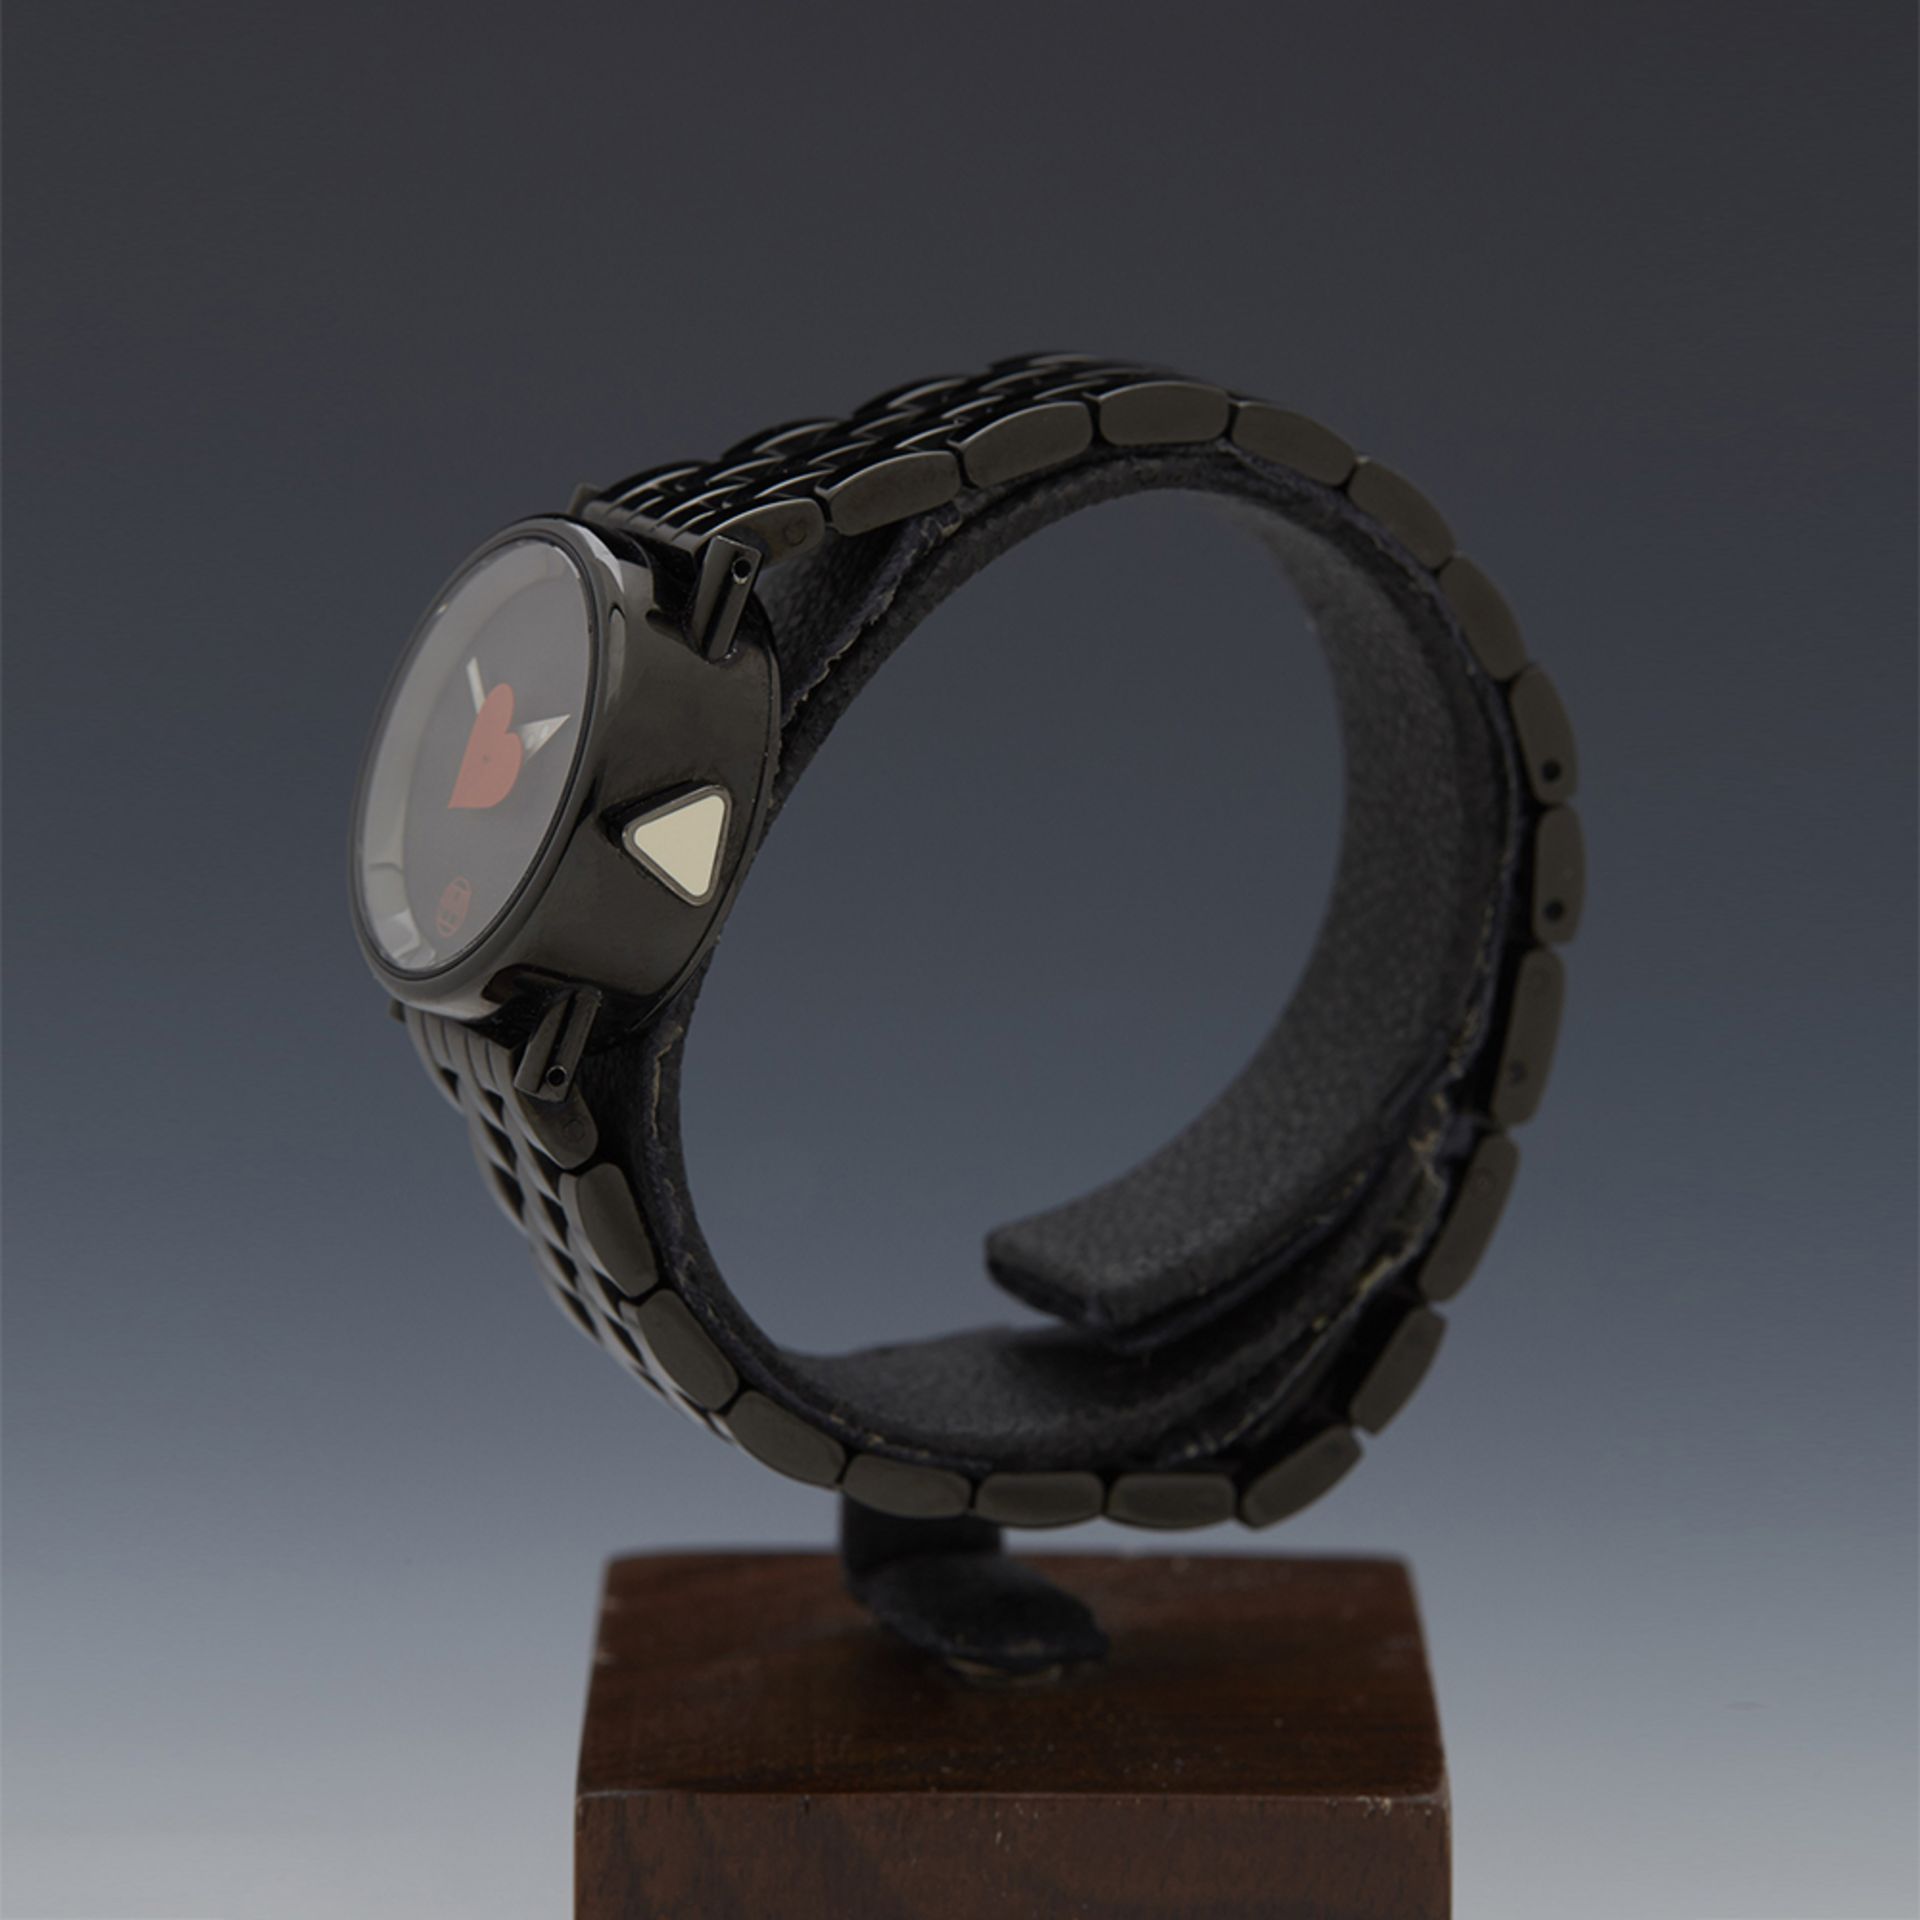 Alain Silberstein Mikro Valentine 23mm PVD Coated Stainless Steel - MO21 - Image 5 of 9